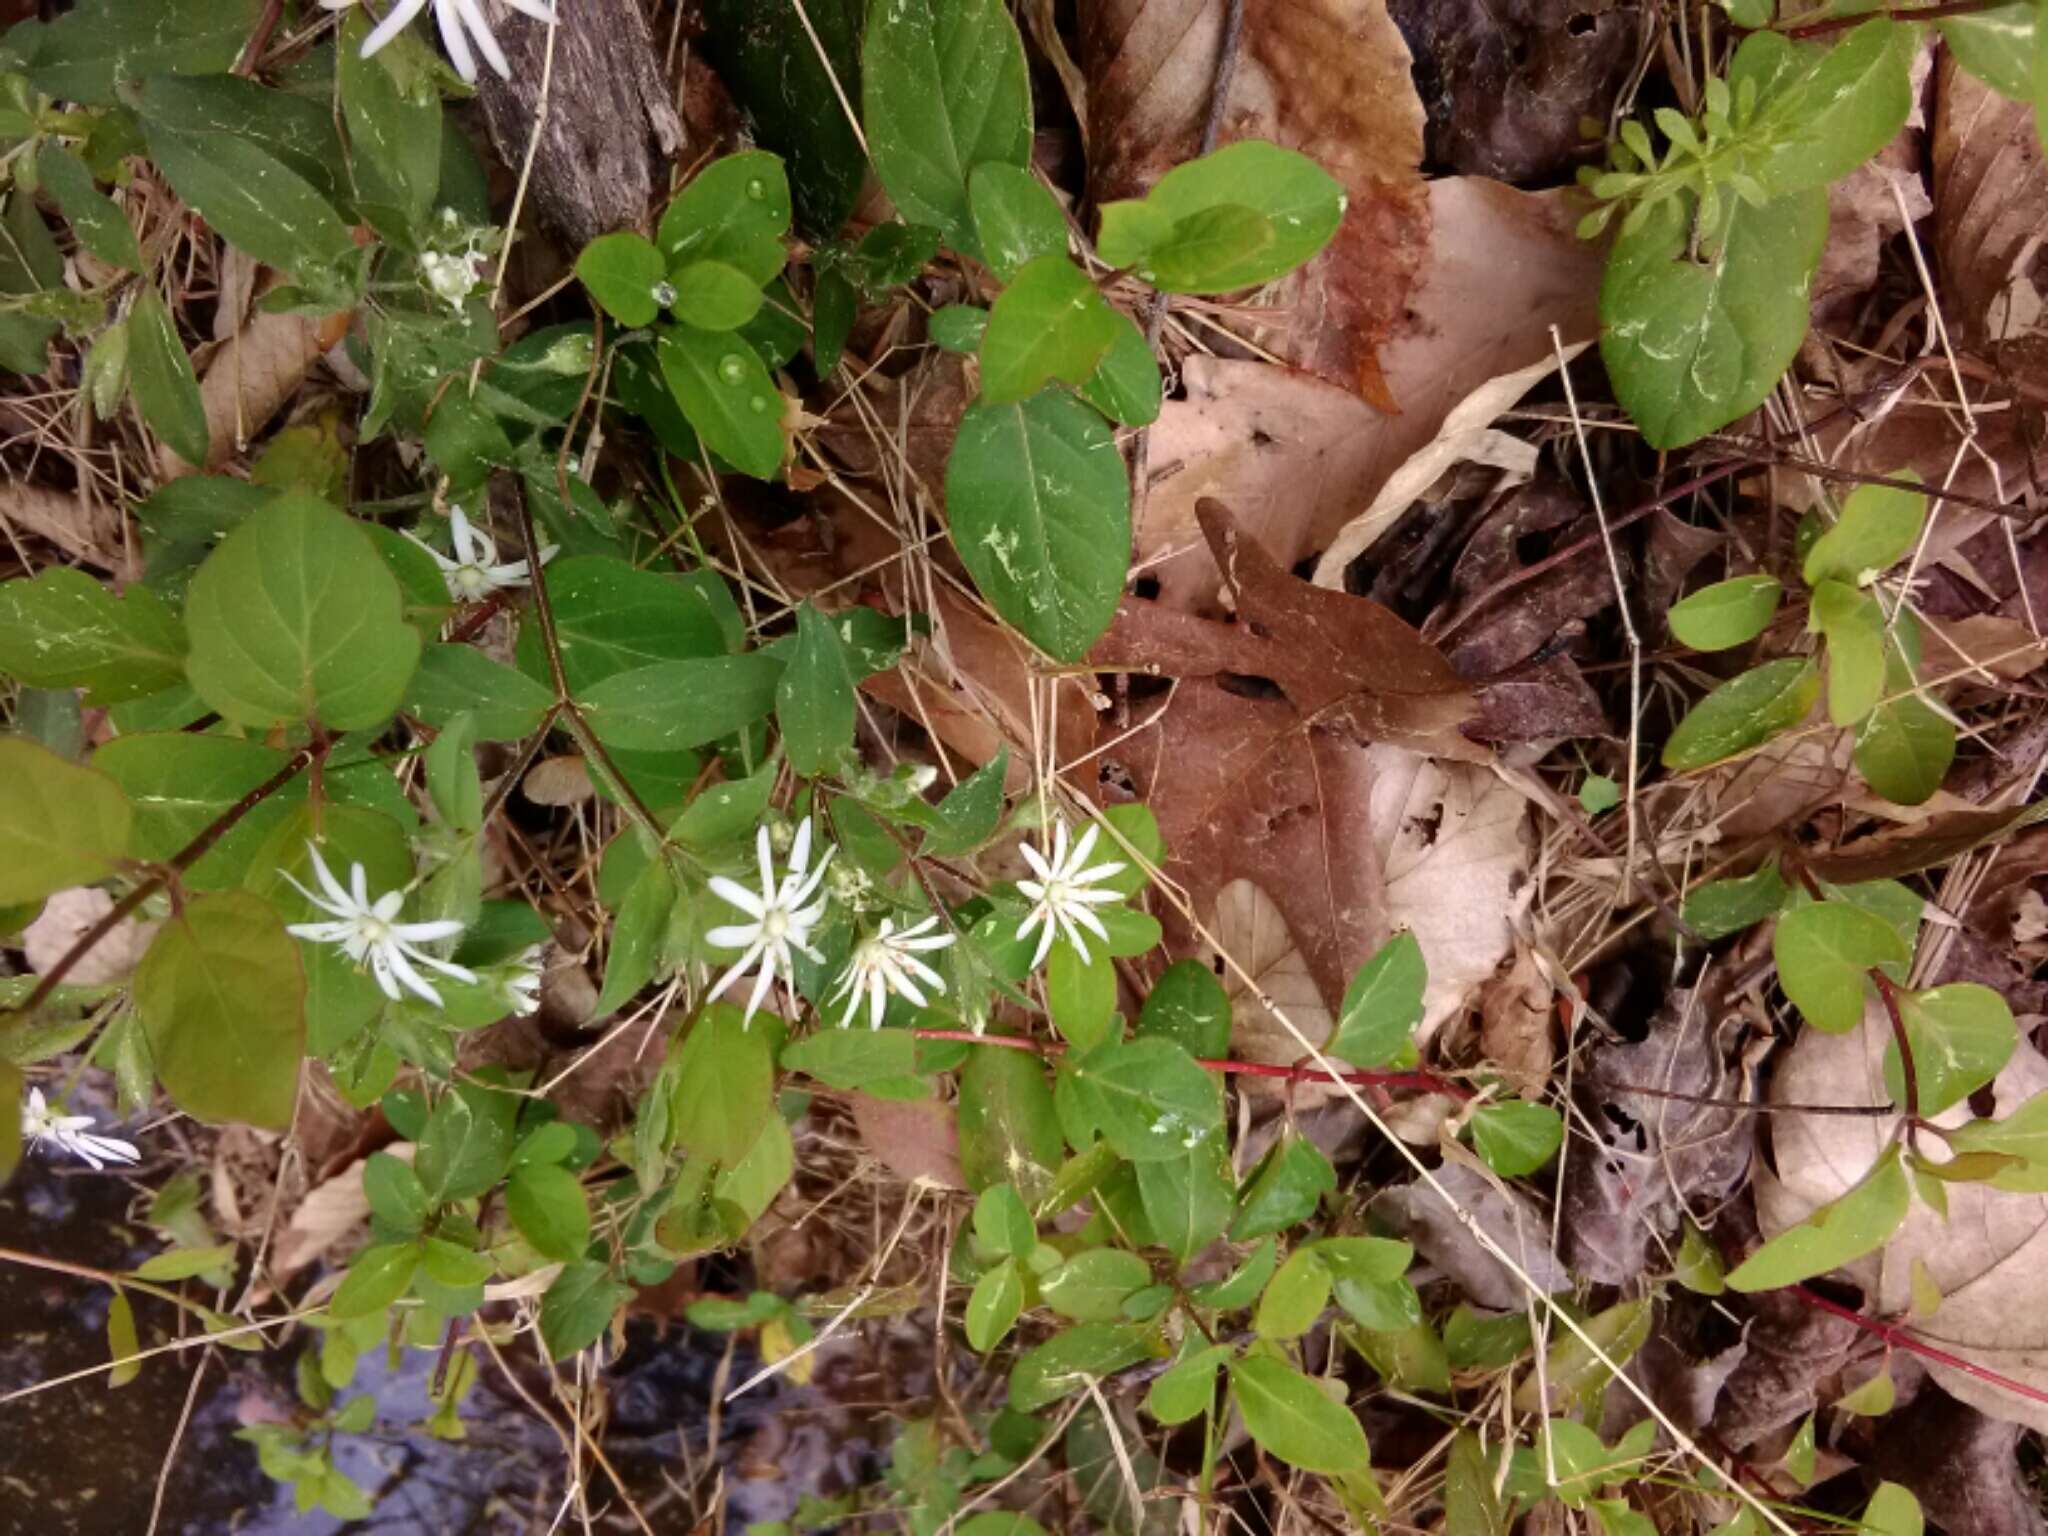 Image of star chickweed